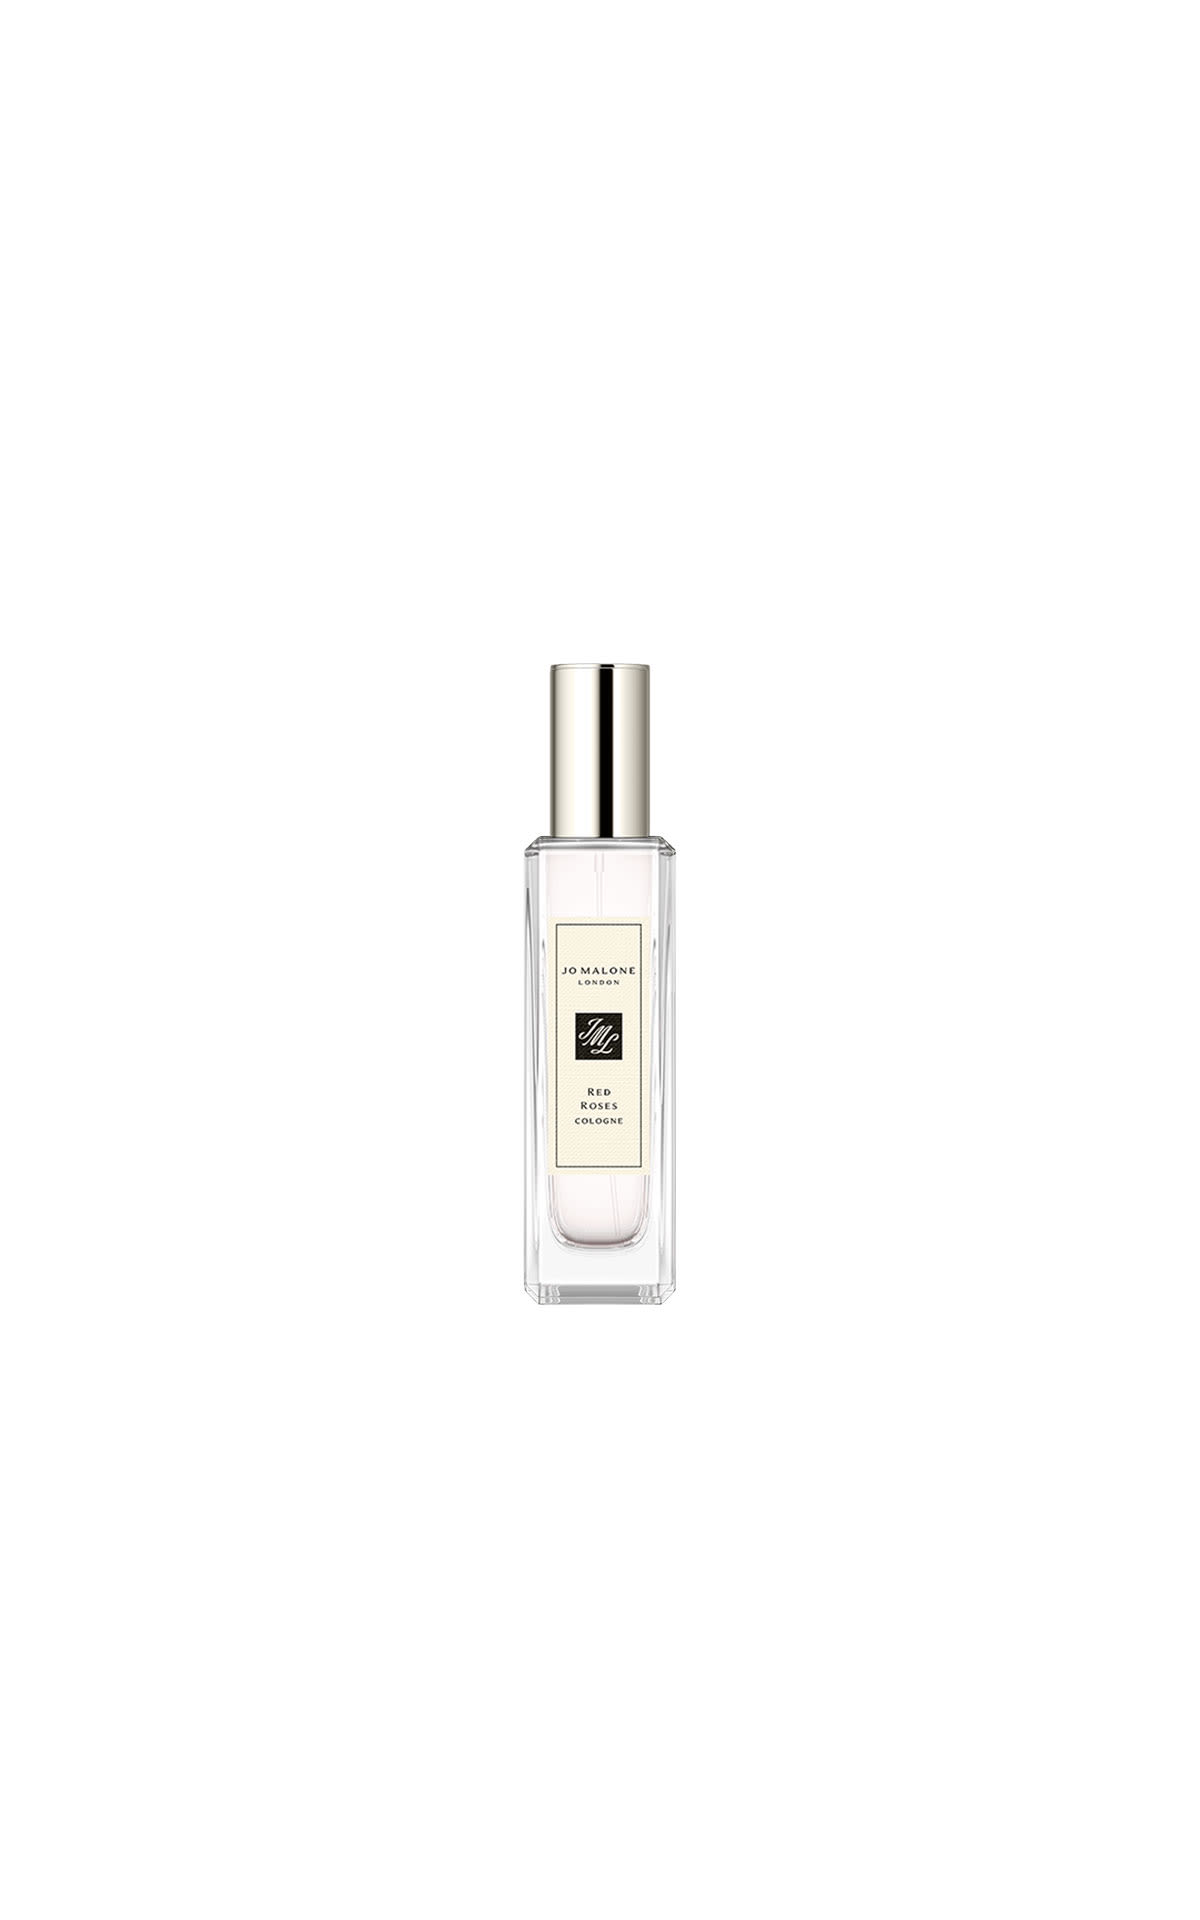 Jo Malone Red roses cologne 30ml from Bicester Village